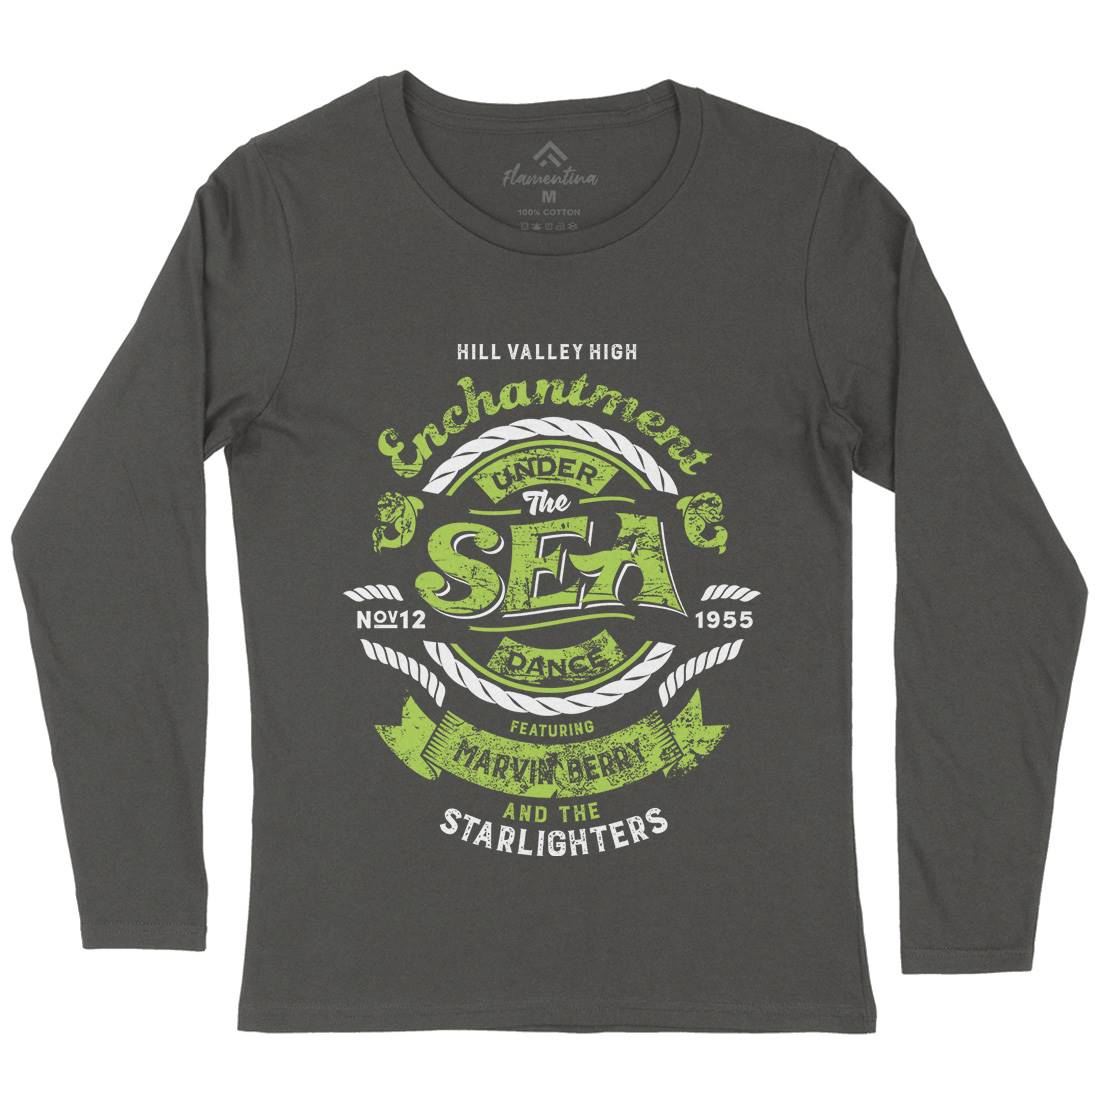 Enchantment Under The Sea Womens Long Sleeve T-Shirt Space D329